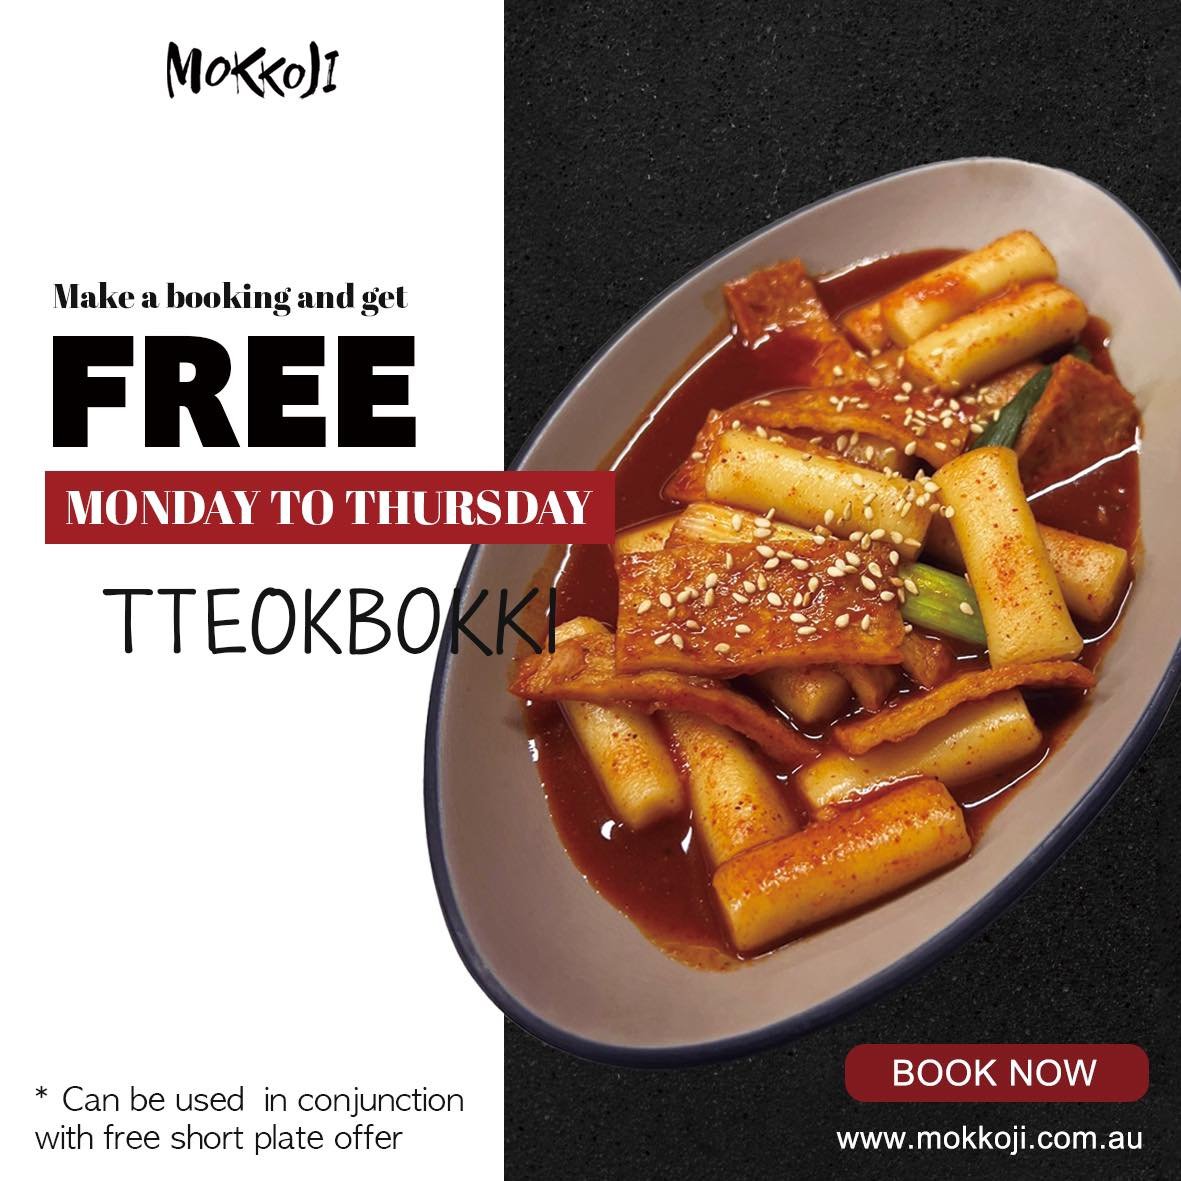 We are giving away free tteokbokki for all customers that make a booking in advance during the weekdays, Monday to Thursday. What&rsquo;s more is this offer is valid with our free short plate offer that is currently running as well! Come and dine wit